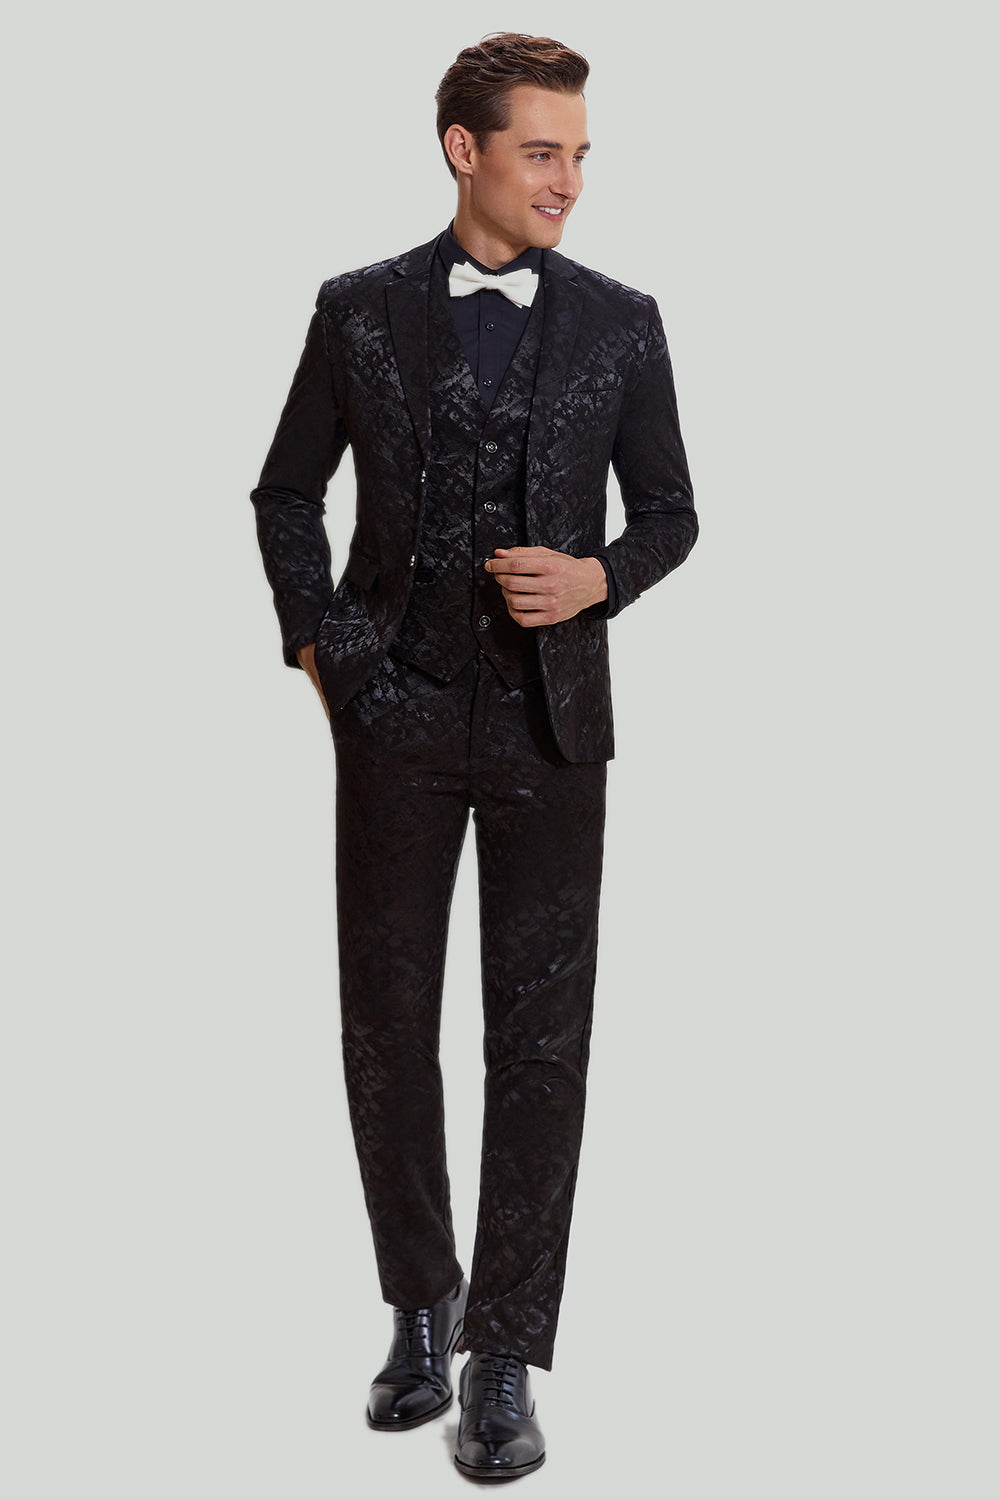 ZAPAKA Men's Homecoming Suits Black 3-piece Jacquard Prom Suits